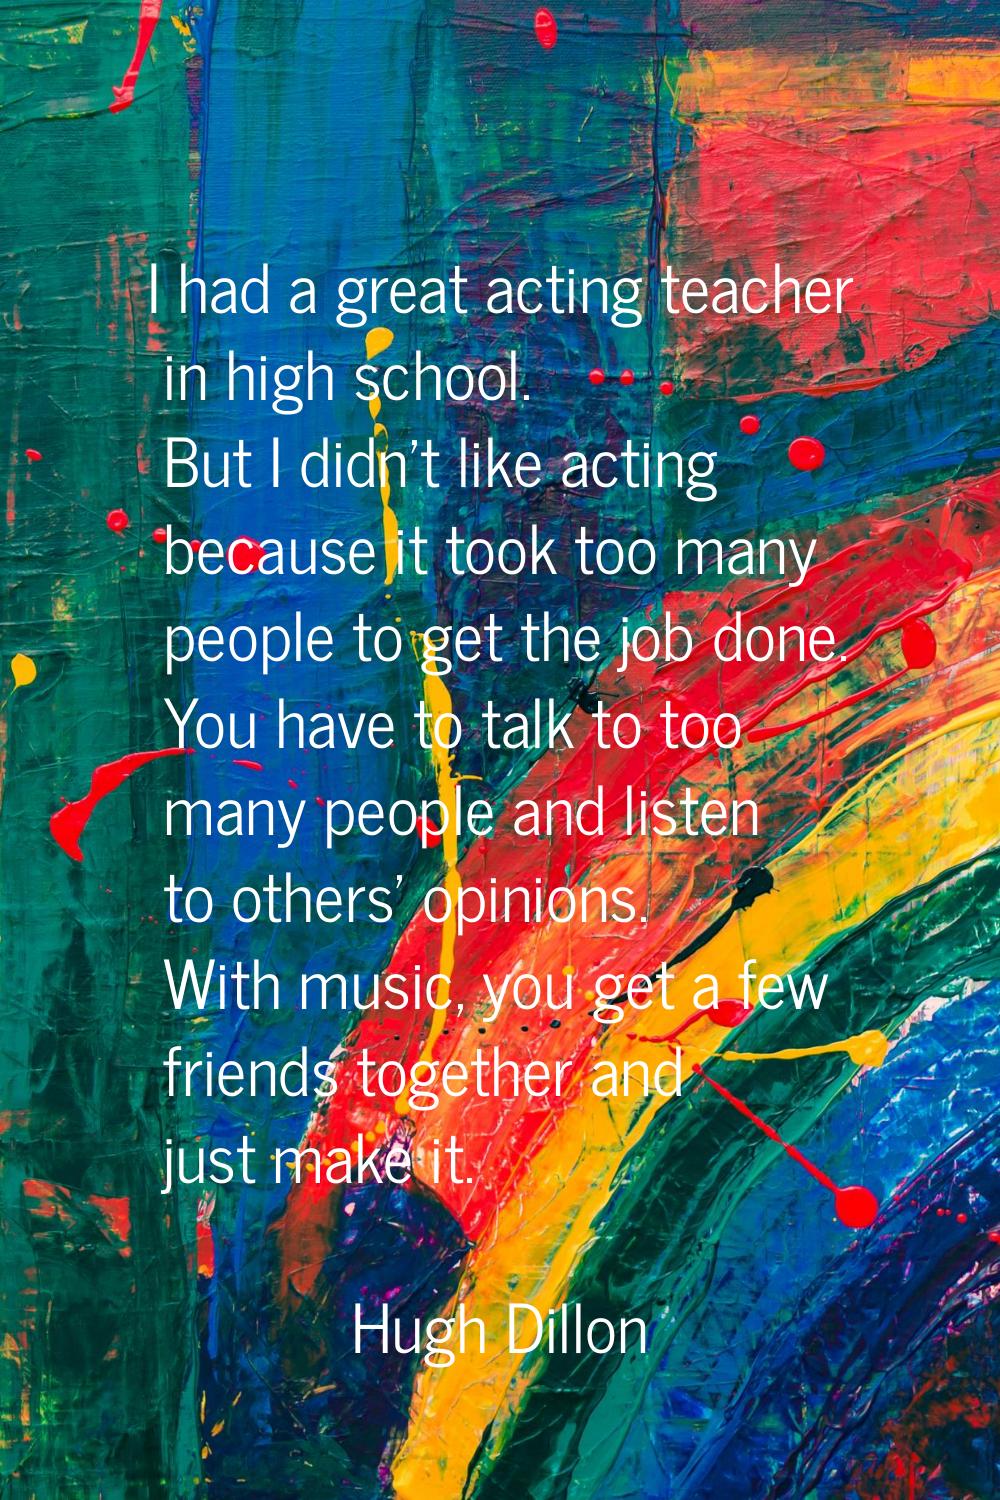 I had a great acting teacher in high school. But I didn't like acting because it took too many peop